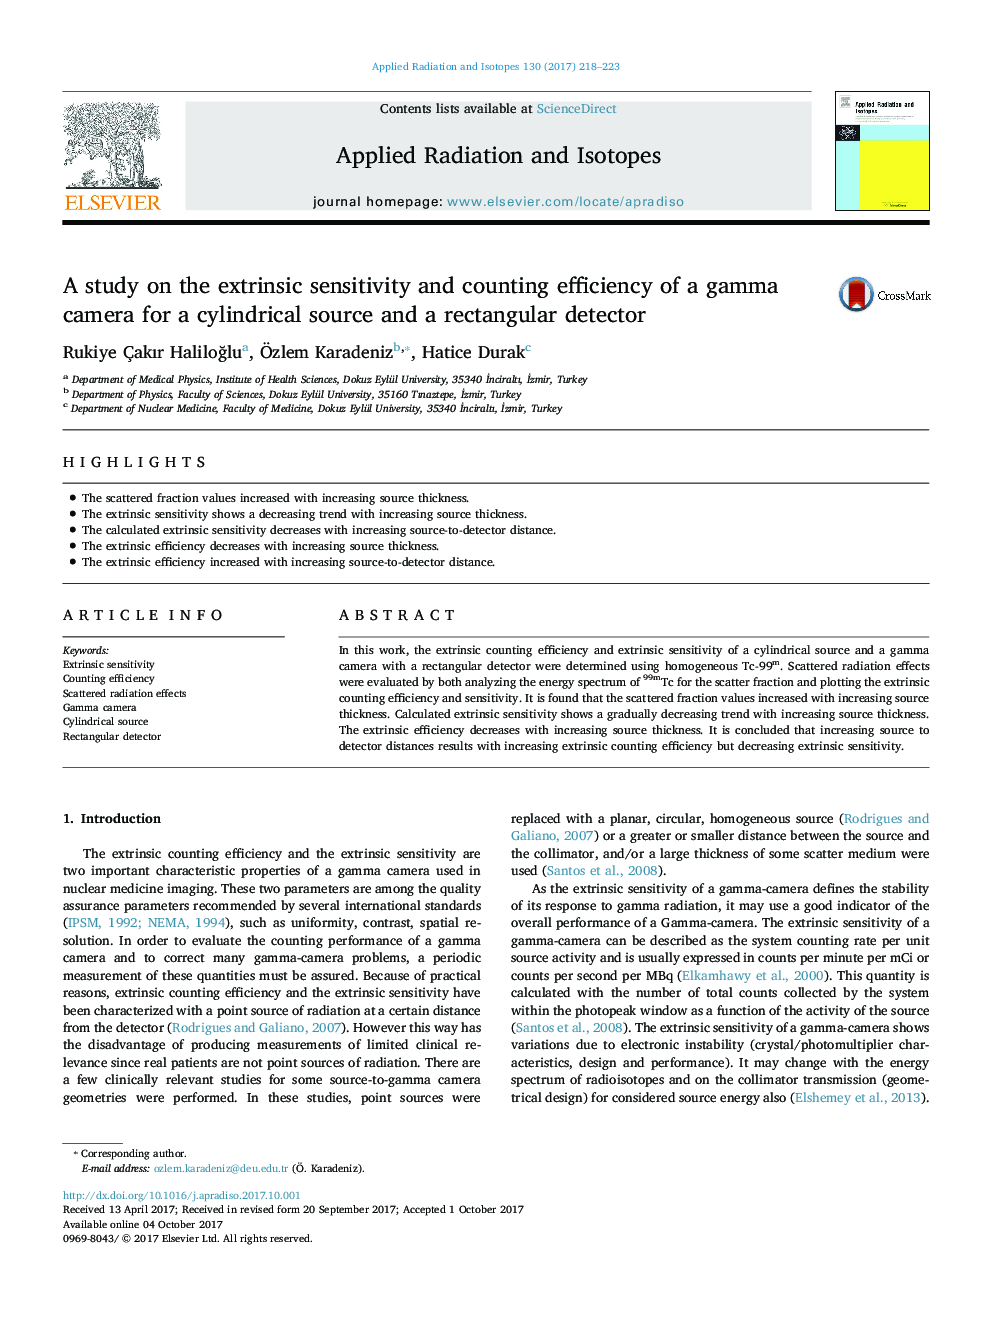 A study on the extrinsic sensitivity and counting efficiency of a gamma camera for a cylindrical source and a rectangular detector